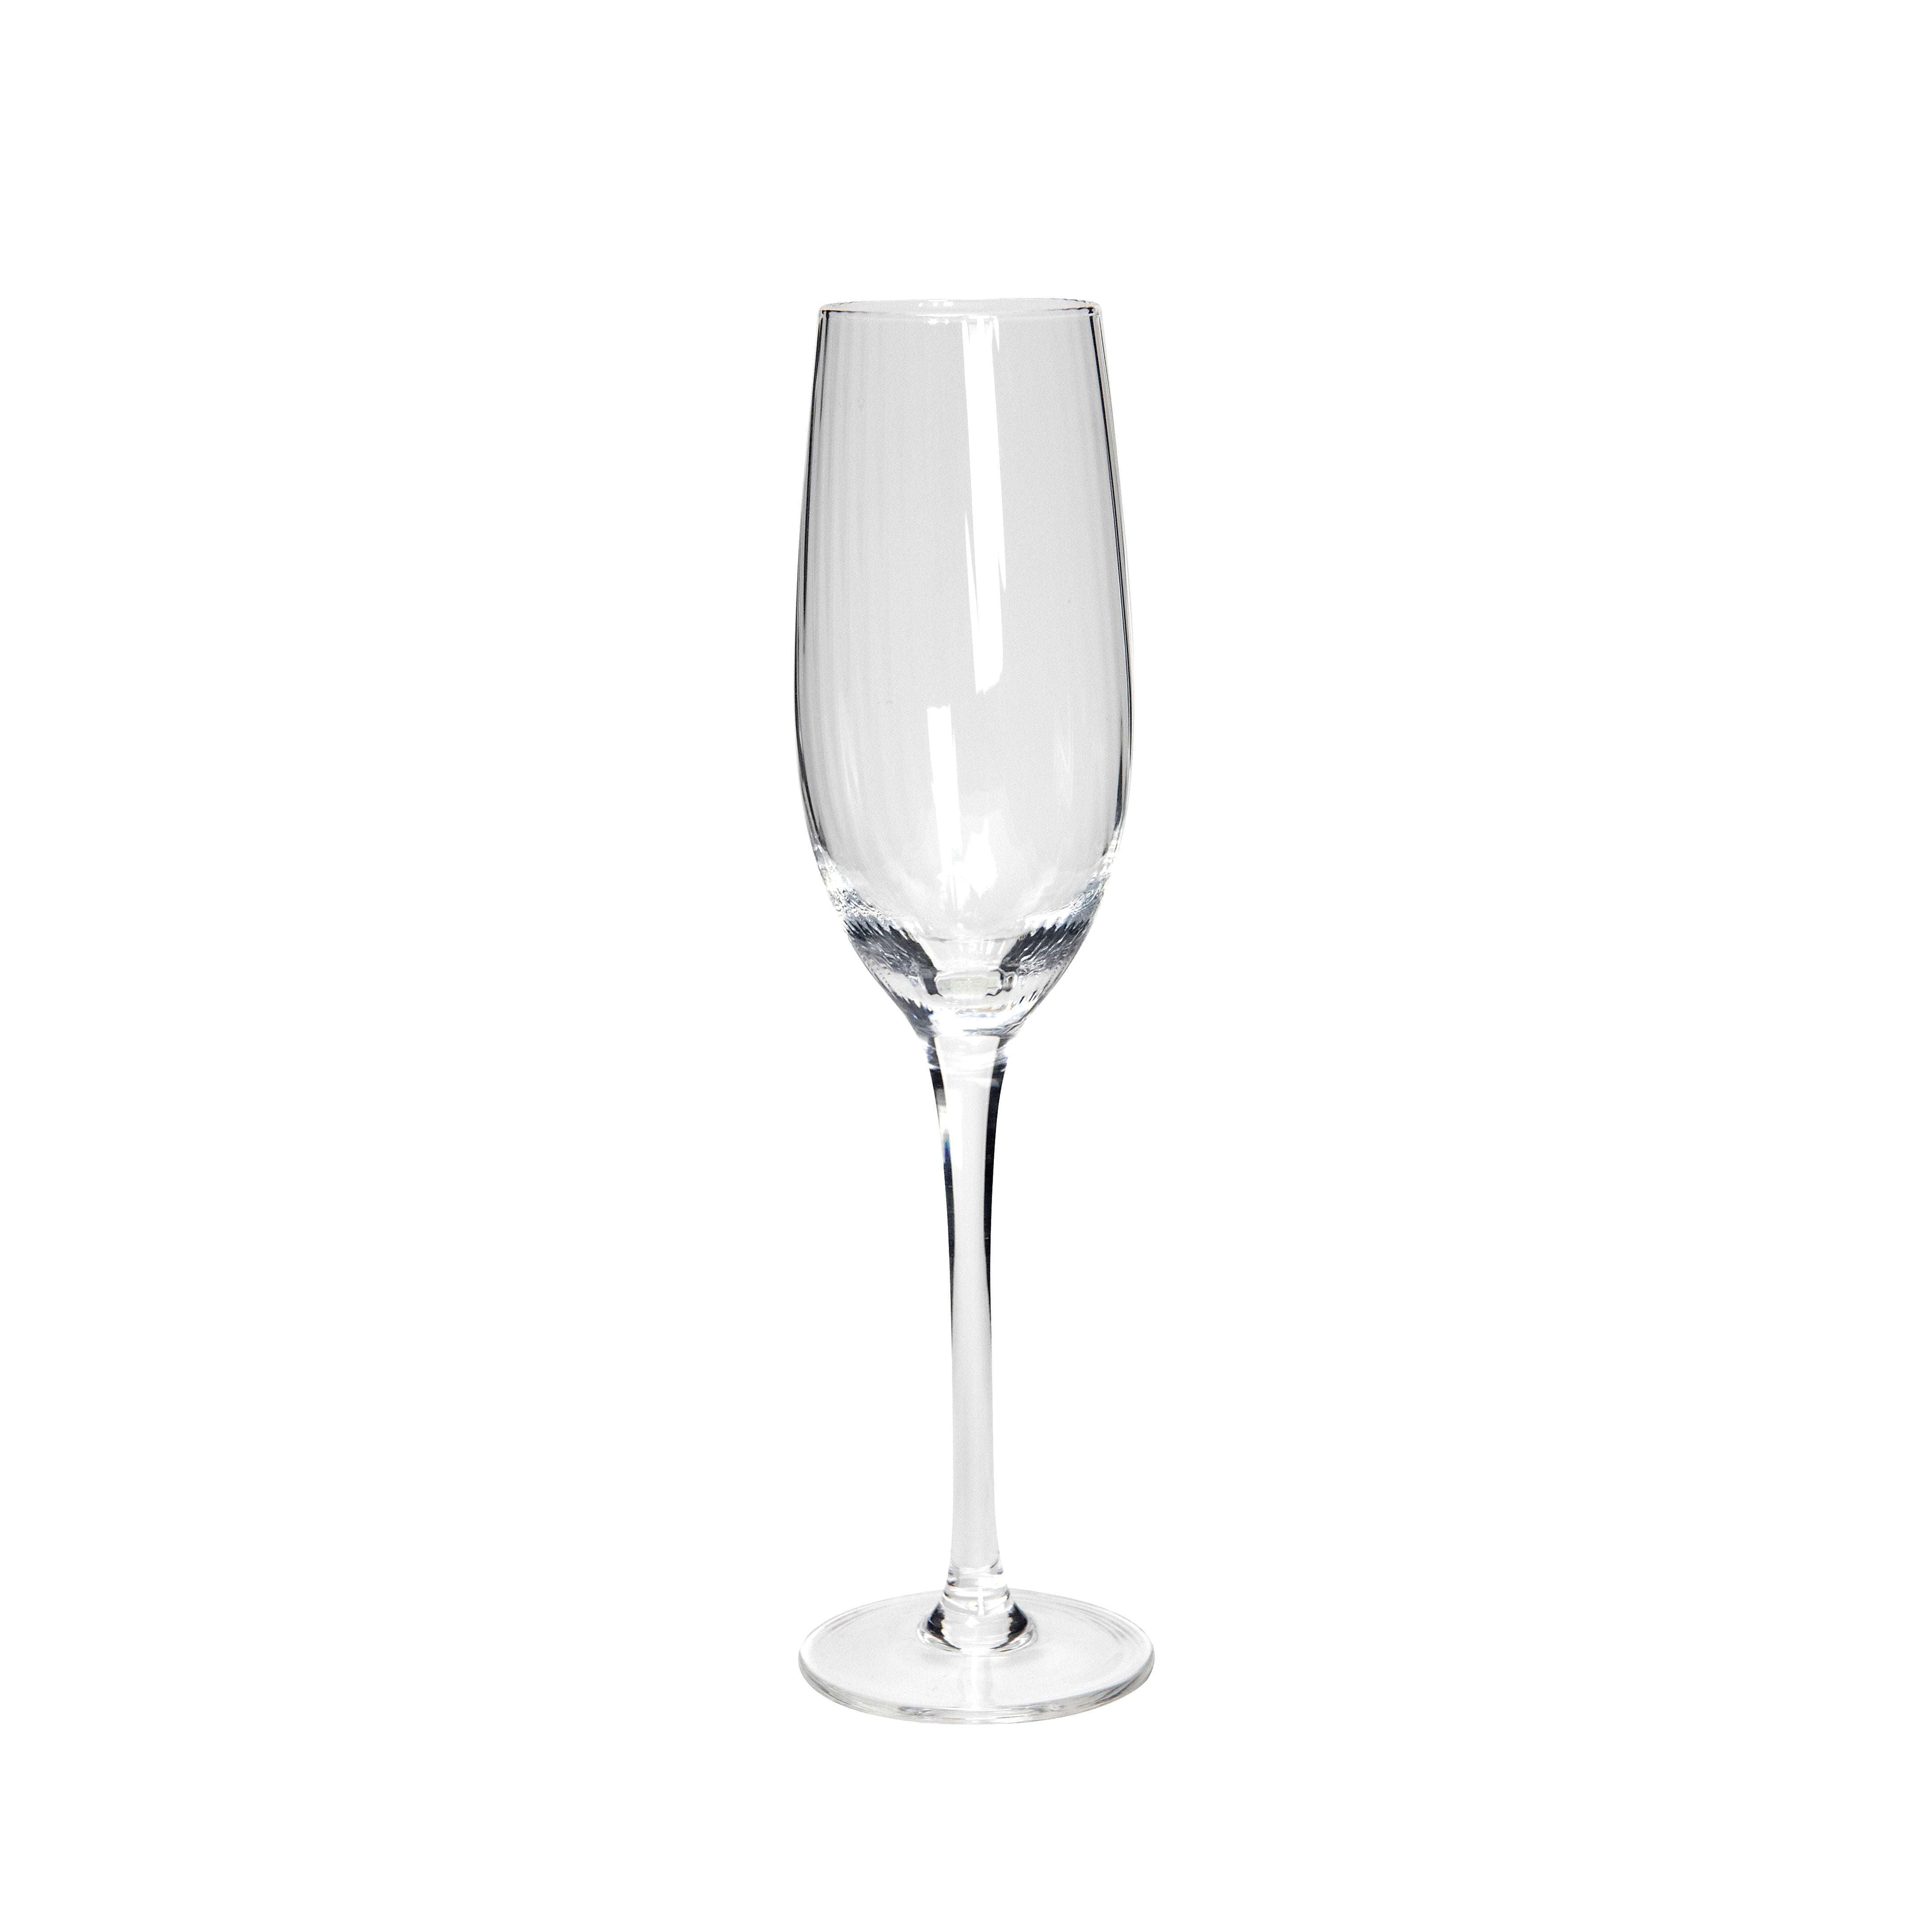 Impodimo Living & Giving:Kirshaw Ribbed Champagne Flute:Swing Gifts